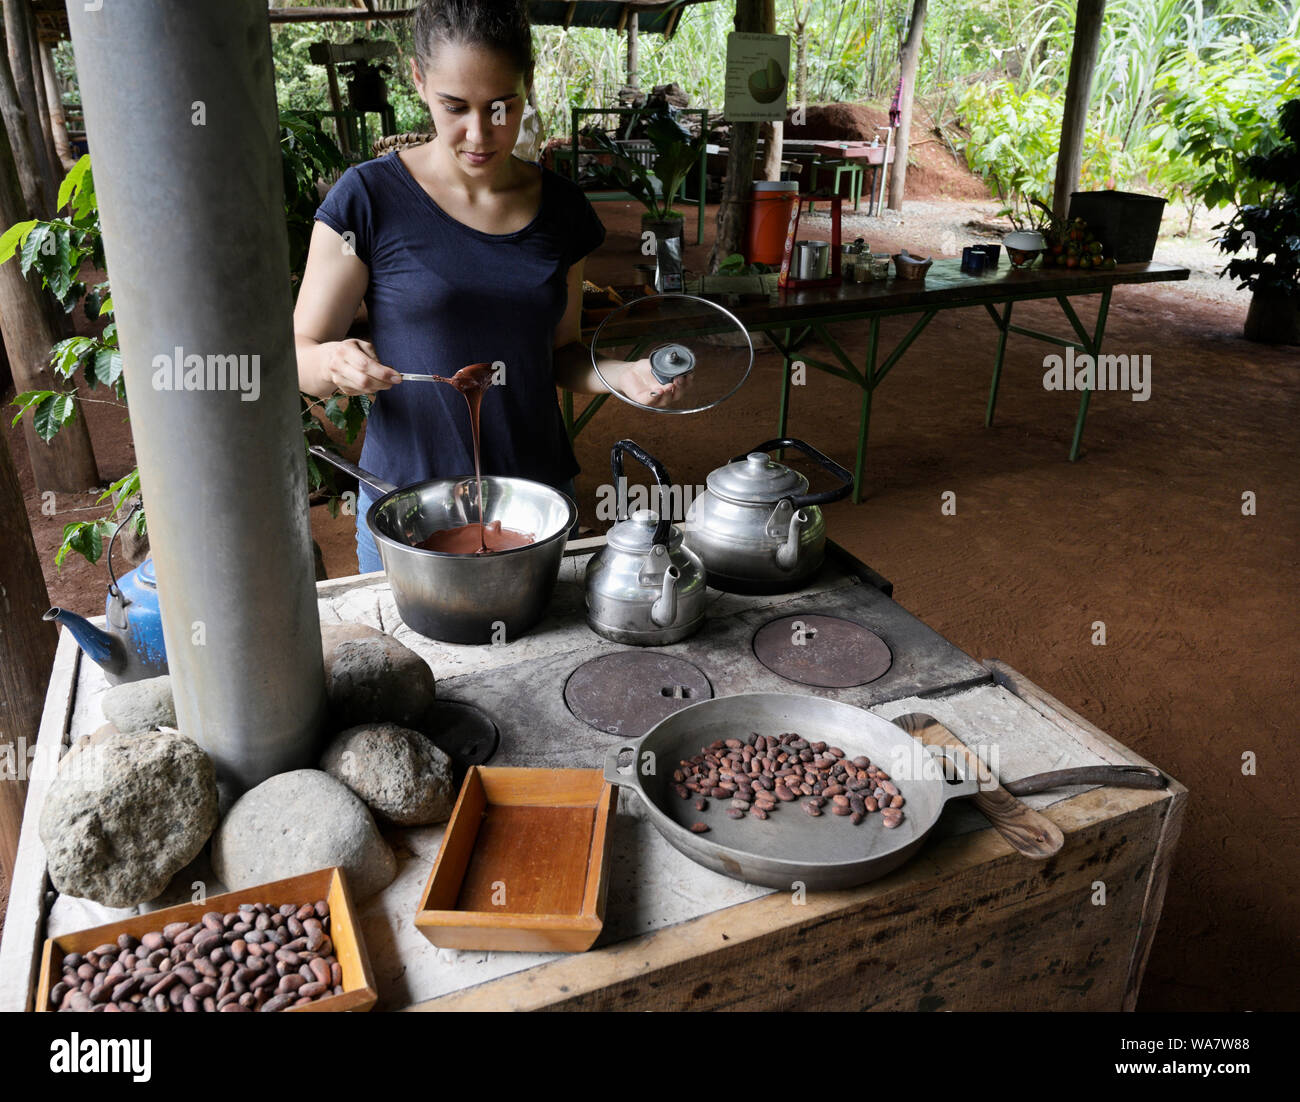 Making chocolate. Woman on Costa Rican farm making cocoa from cacao beans Stock Photo